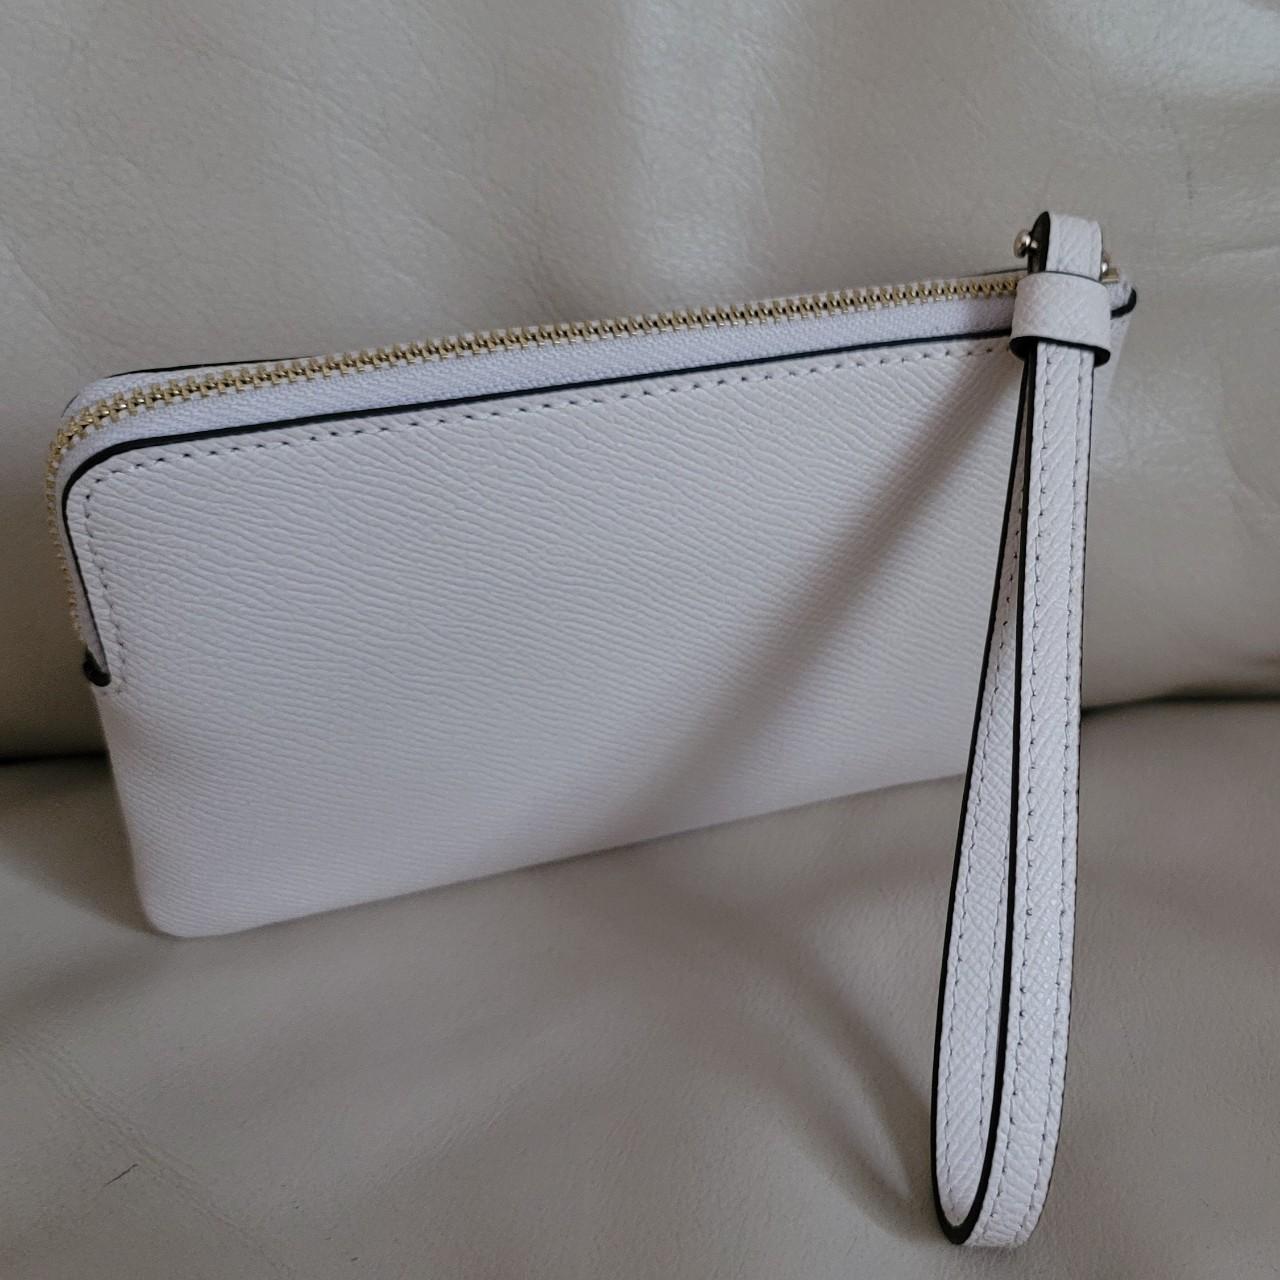 Alban Replacement White Leather Wristlet Strap for Wallet, Clutch